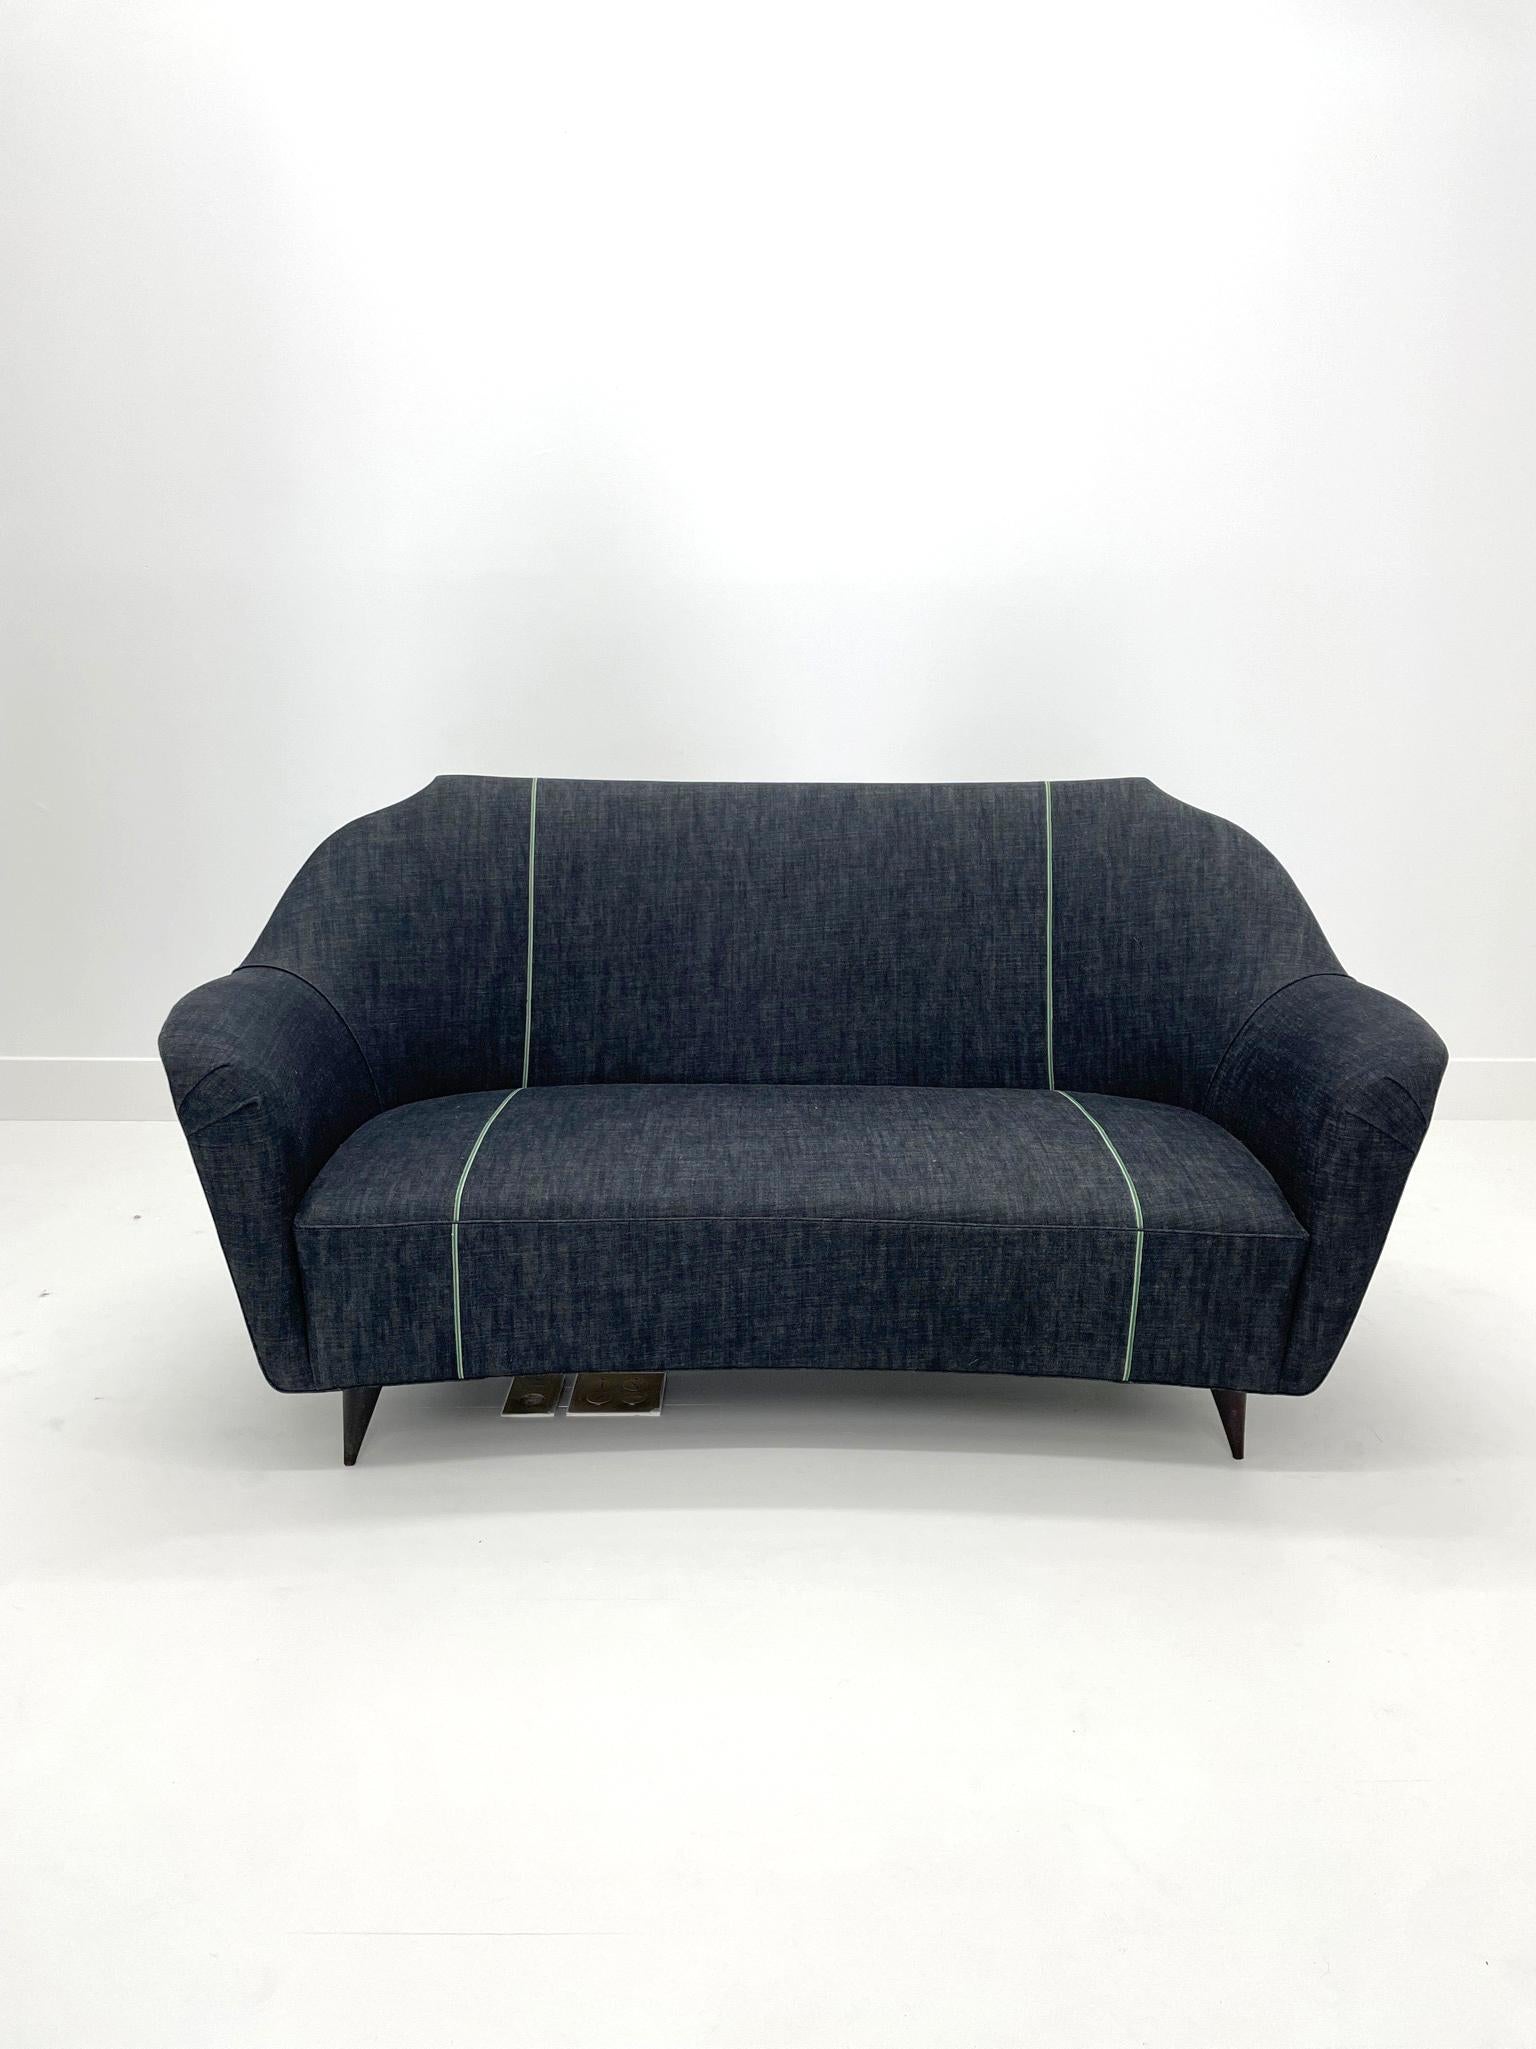 Settee by Ico Parisi, c. 1950. This tailored sculptural settee is as stylish as it is comfortable. Poised yet relaxed, the contours of this sofa are remarkably body conscious and naturally create a space for two people to sit at an angle to one